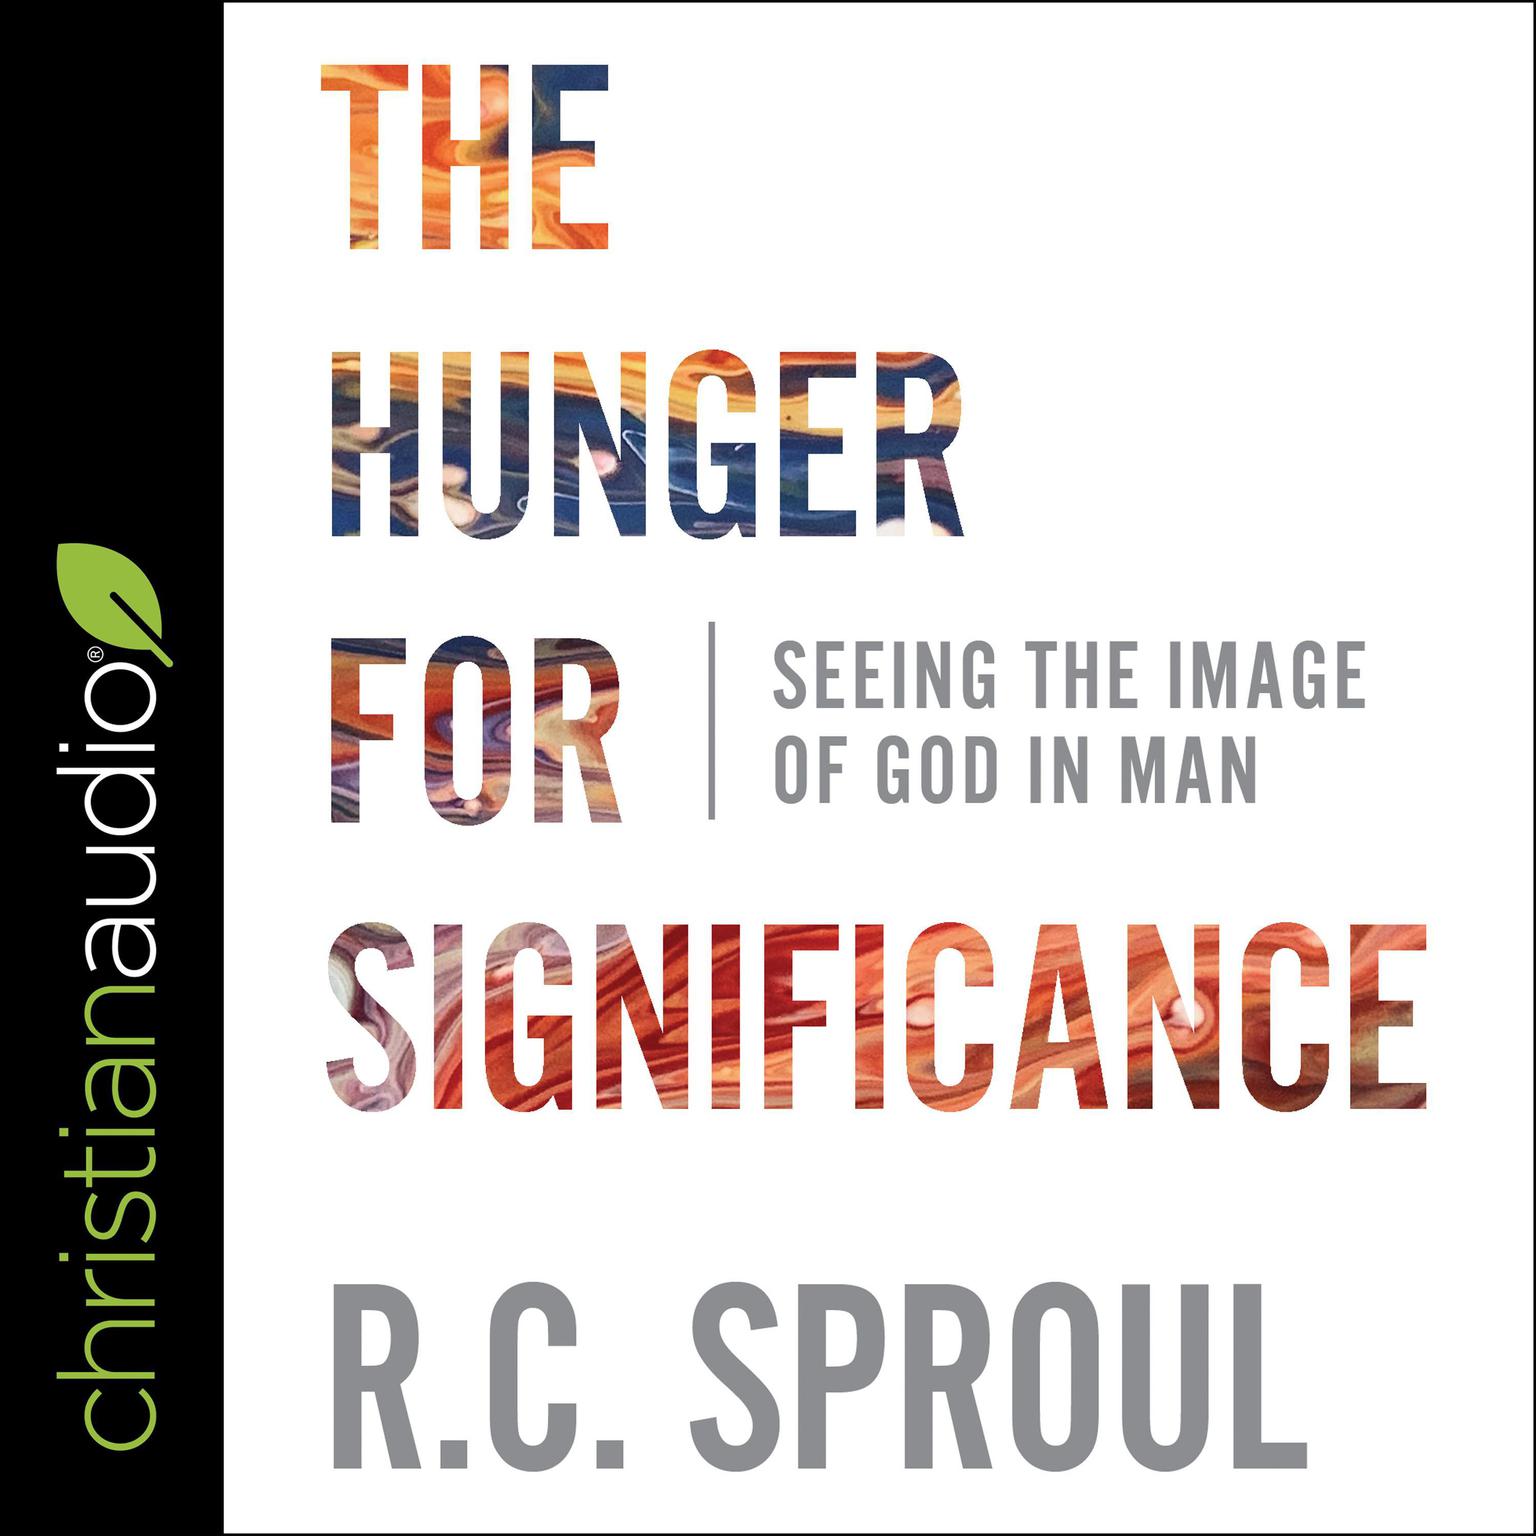 The Hunger for Significance: Seeing the Image of God in Man Audiobook, by R. C. Sproul